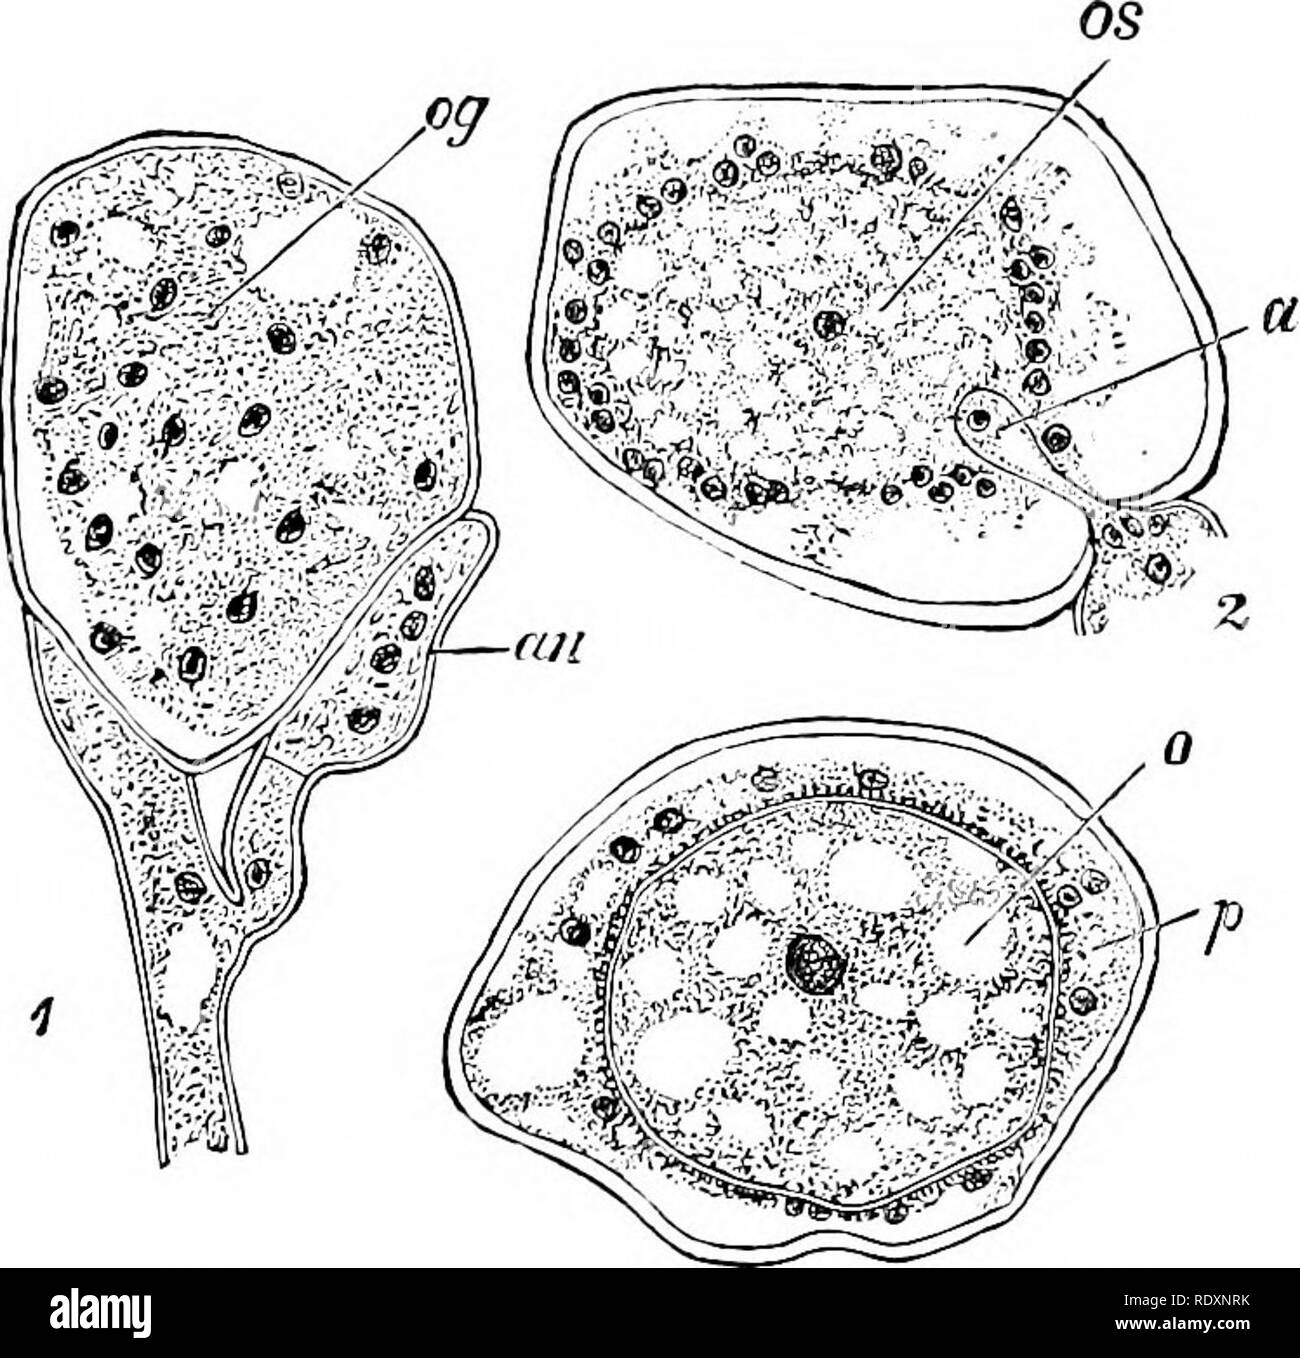 . Botany of the living plant. Botany. 422 BOTANY OF THE LIVING PLANT through the air. But it shows its real nature on germination by pro- ducing zoospores which are hberated in water. The modification of. Fio. 357. Fertilisation of thie Peronosporeae. I. Peronospora parasitica, young multi- nucleate oogonium {og), and antheridium {an). 2. Albtigo Candida. Oogonium witli the central, uni-nucleate egg {os), and the fertiUsing tube (a) of the antheridium which introduces the male nucleus. 3. The same. The fertilised egg (0) surrounded by periplasm ip). (After Wager, x 6G6.) {From Strasburger.) su Stock Photo